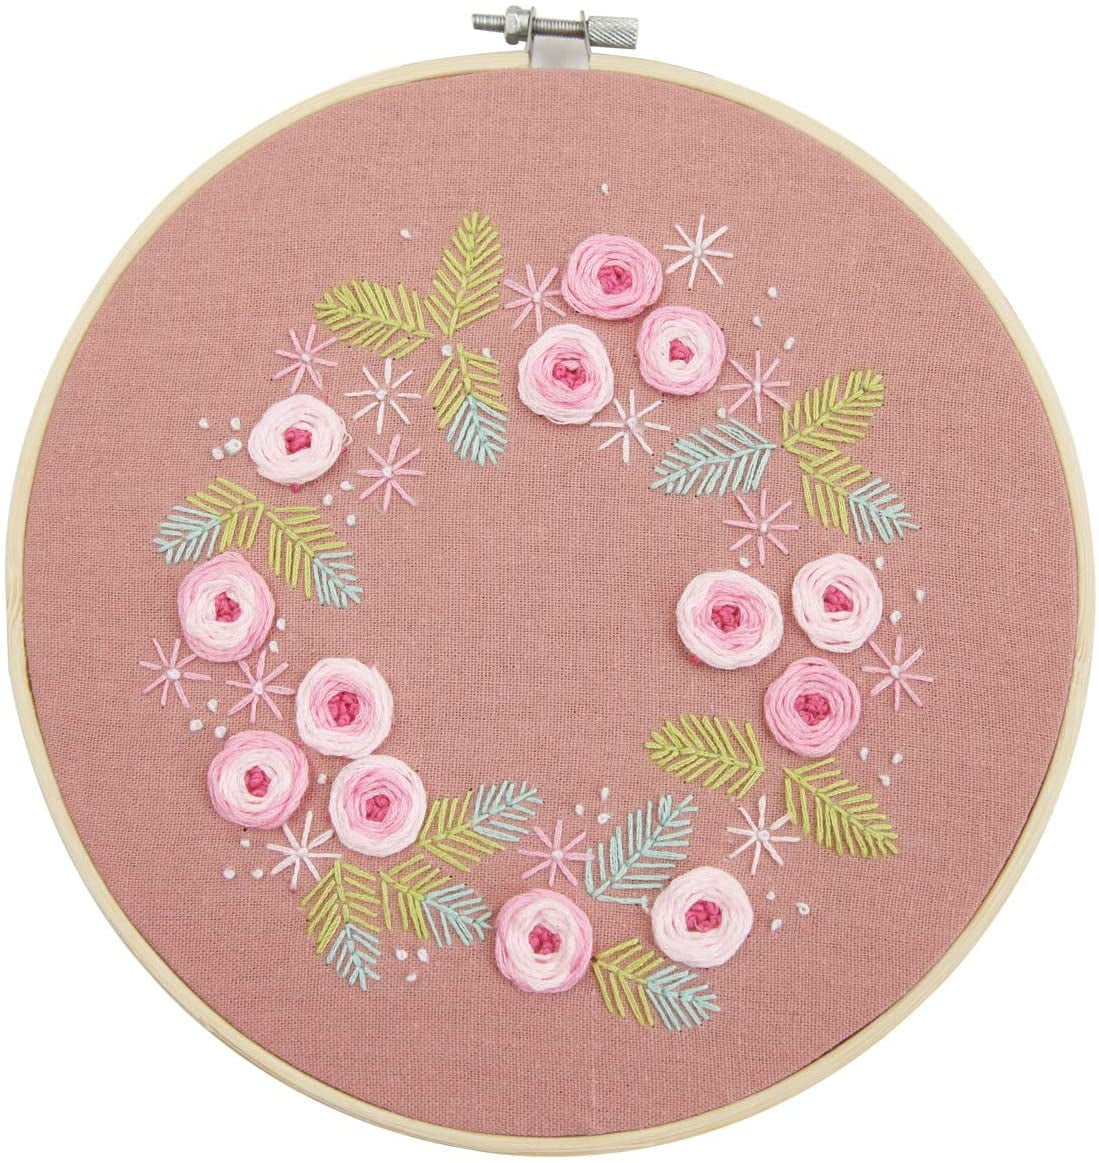 Maydear Stamped Embroidery Kit for Beginners with Pattern, Cross Stitch  Kits - Hibiscus